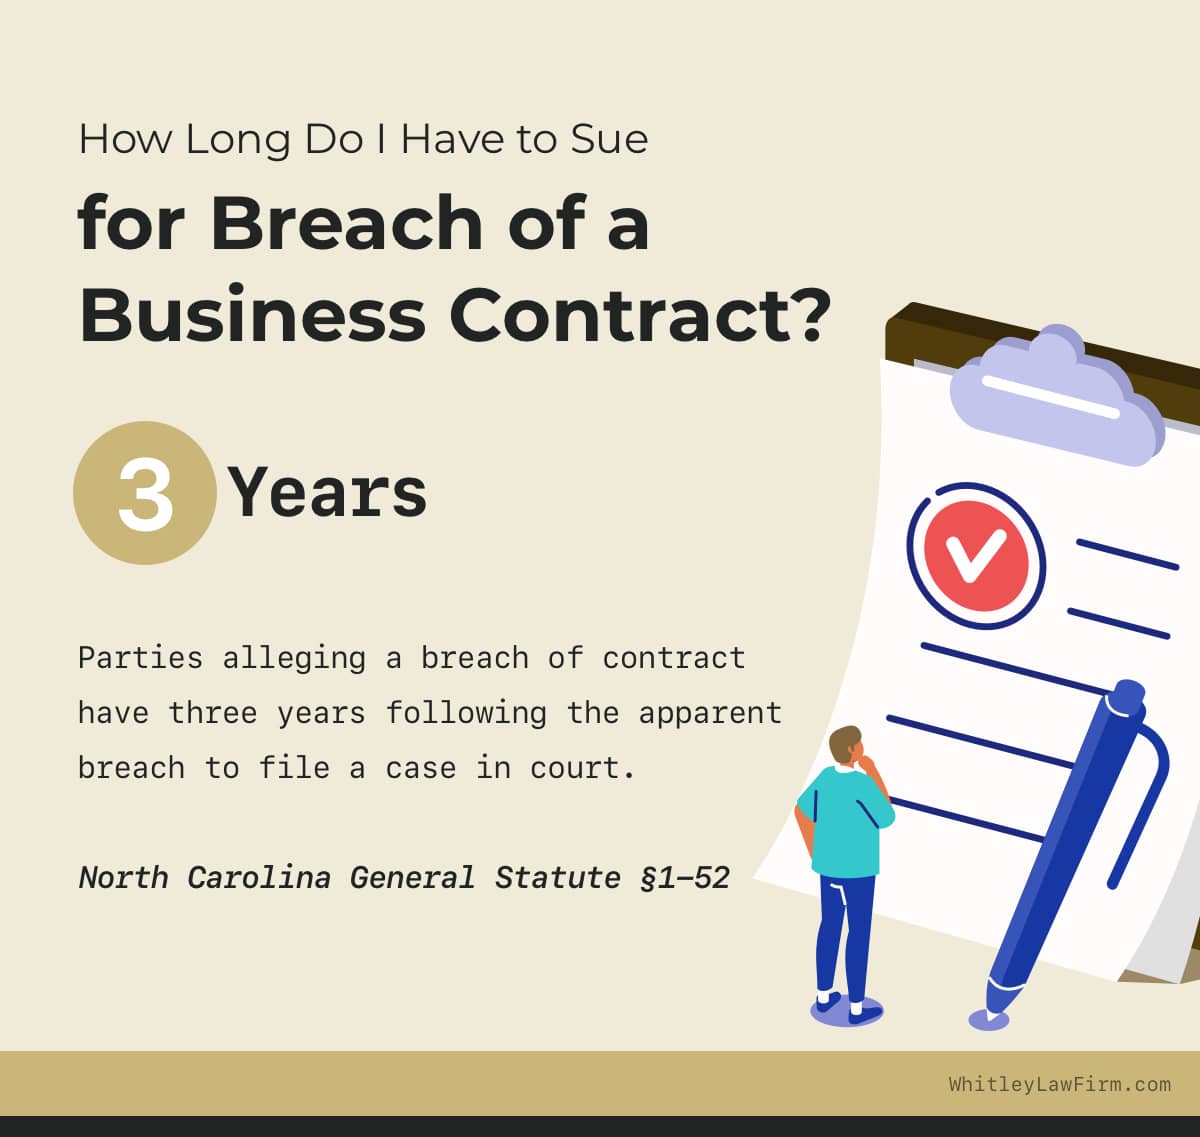 Breach of Contract Statute of Limitations | Whitley Law Firm